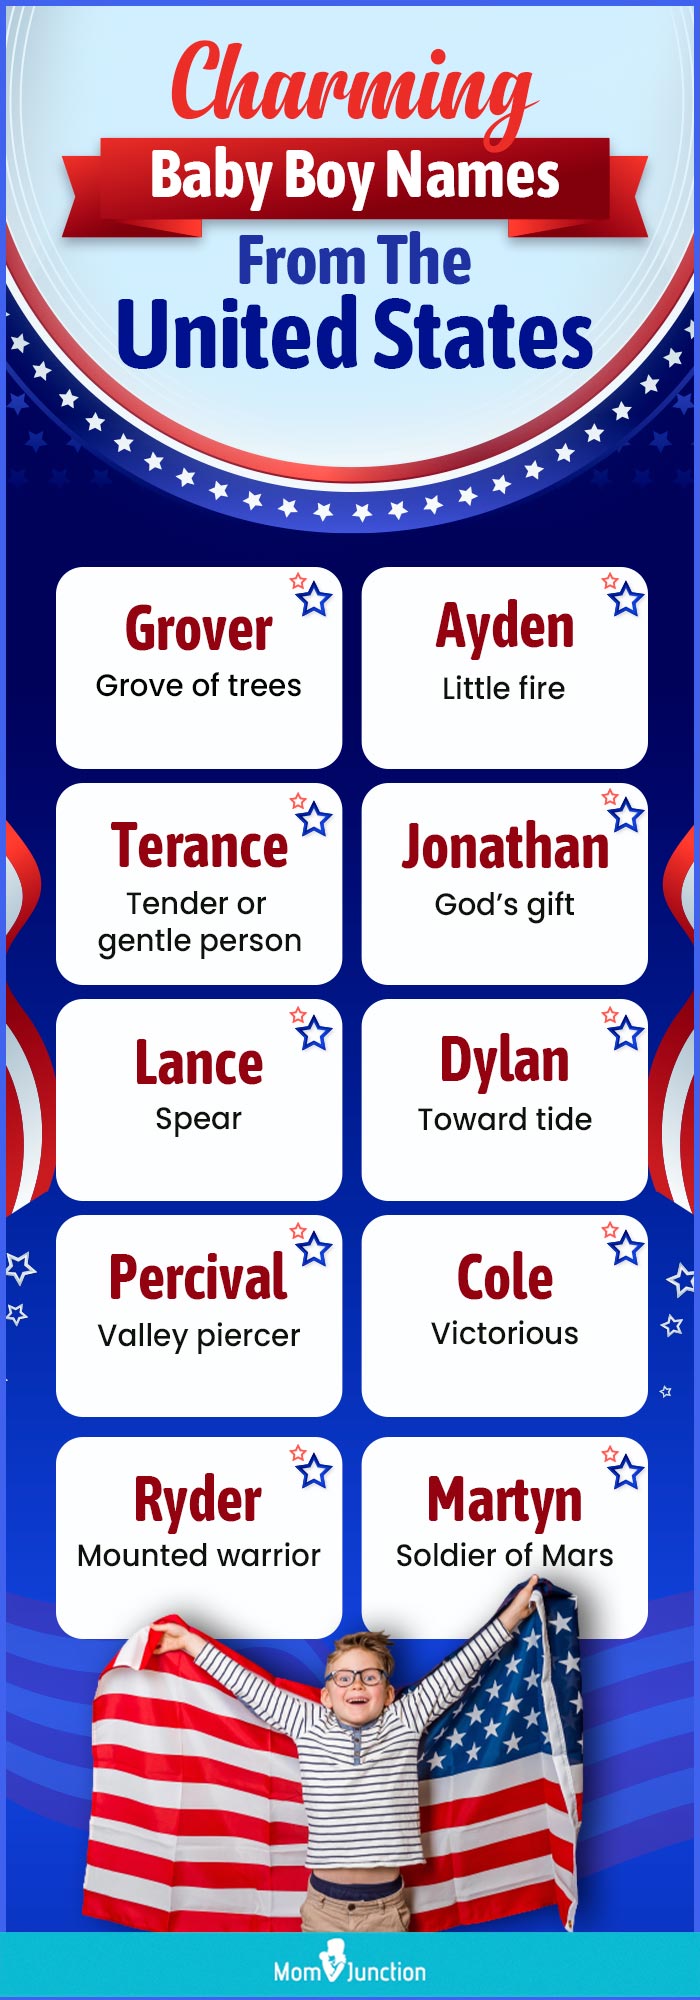 charming baby boy names from the united states (infographic)